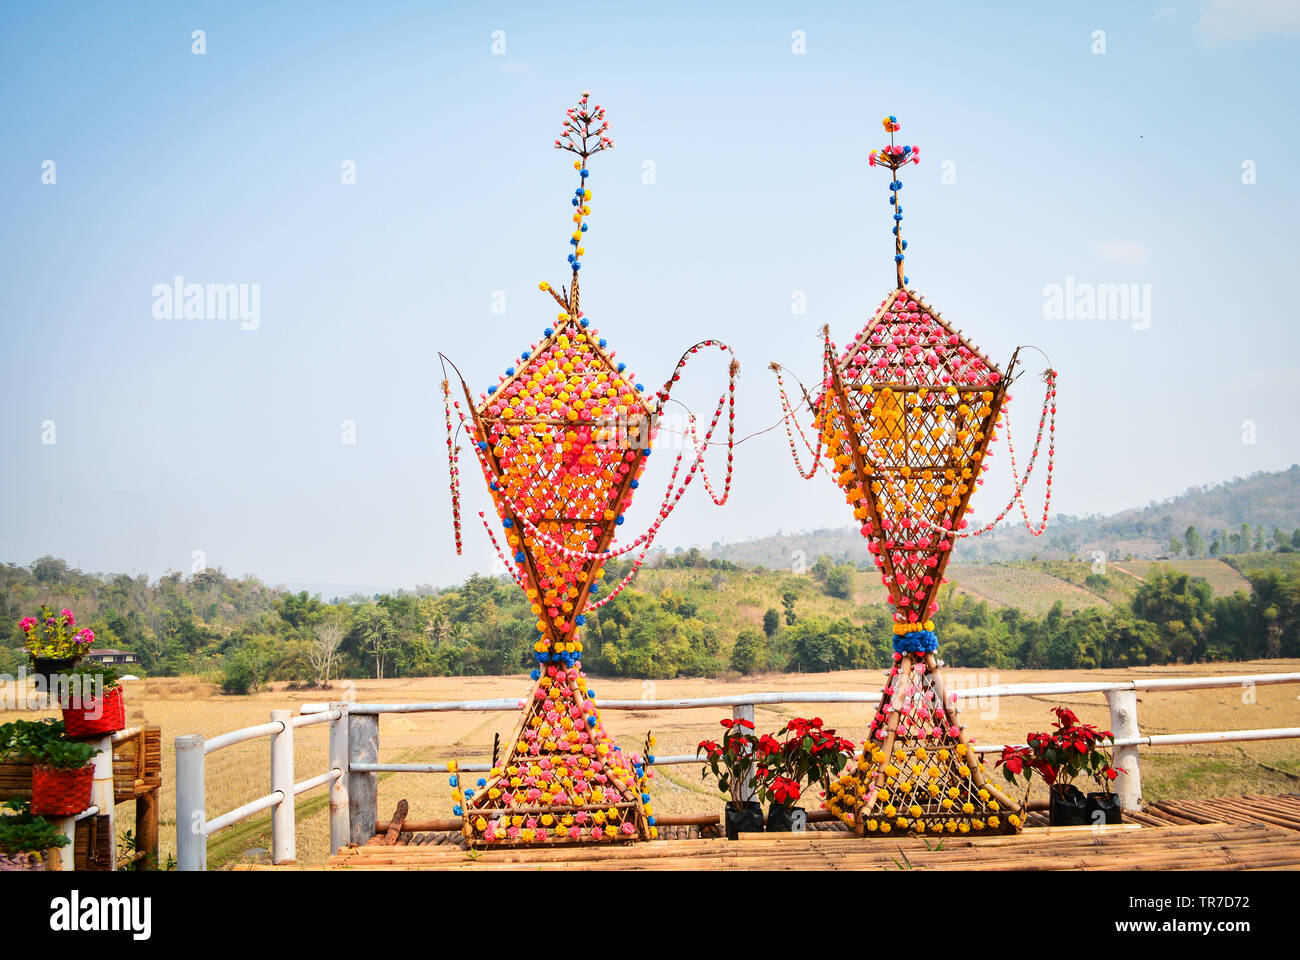 Colorful of flower decorate on bamboo tower shape pyramit with flowers show on balcony and view hill background for buddhist festival at Na Haeo Loei Stock Photo